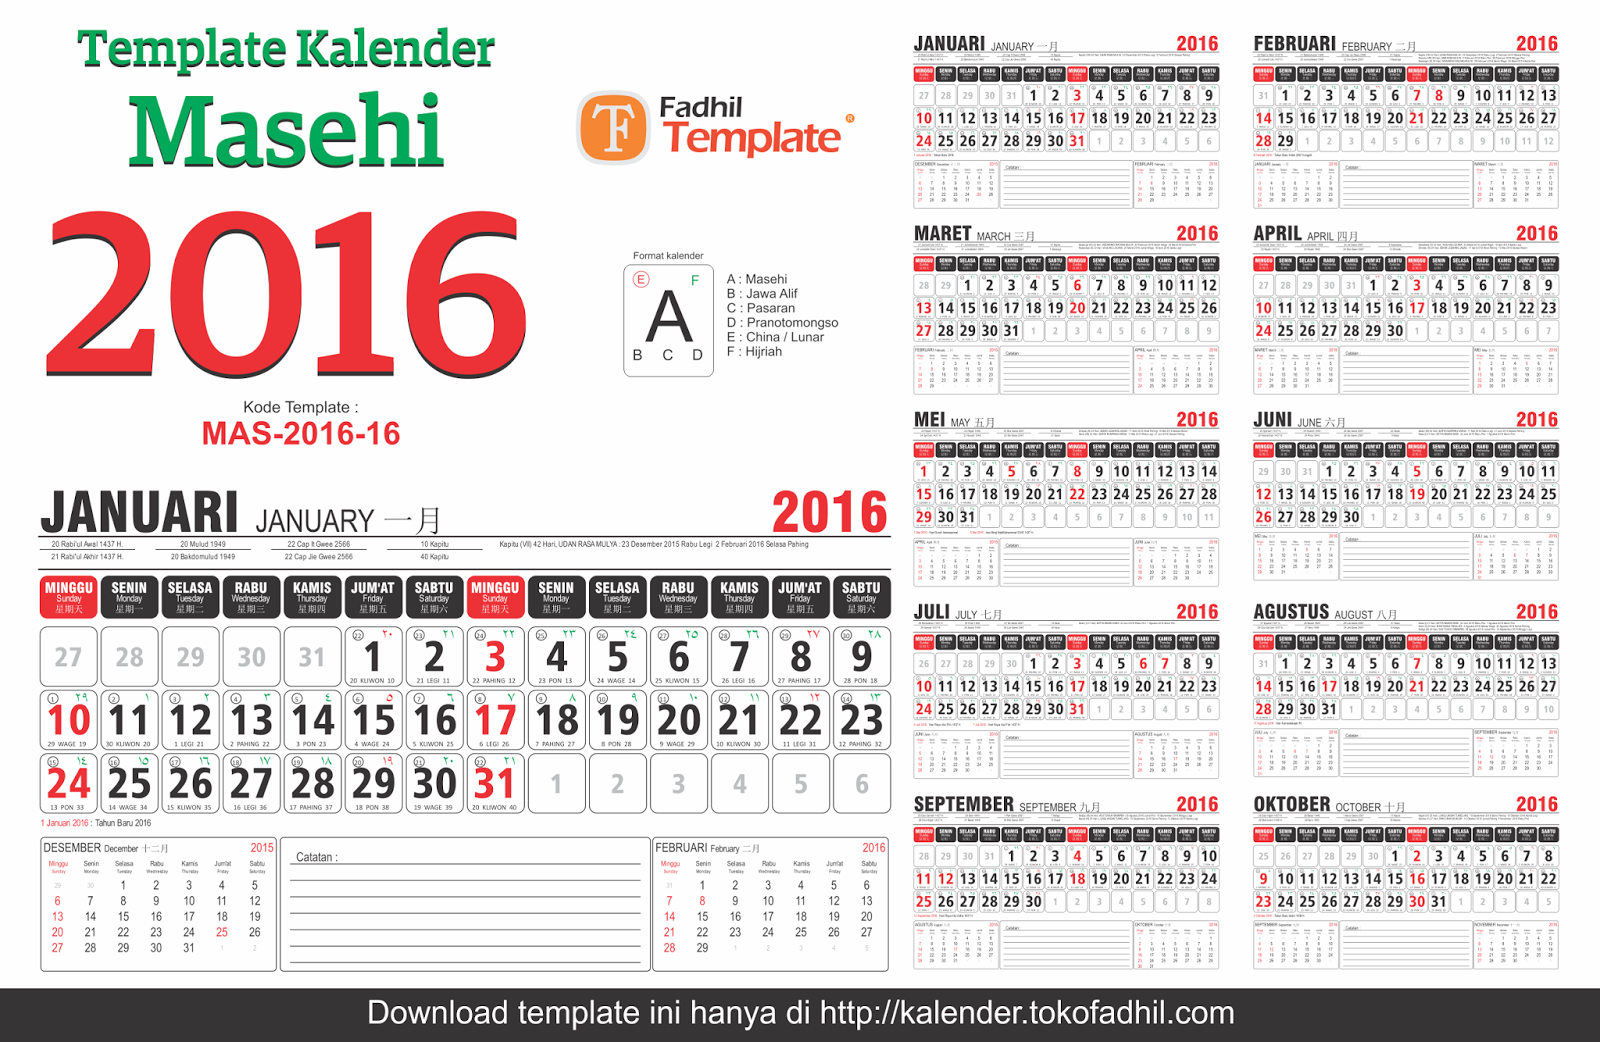 You are browsing the search results for Kalender 2016 Jawa Cdr